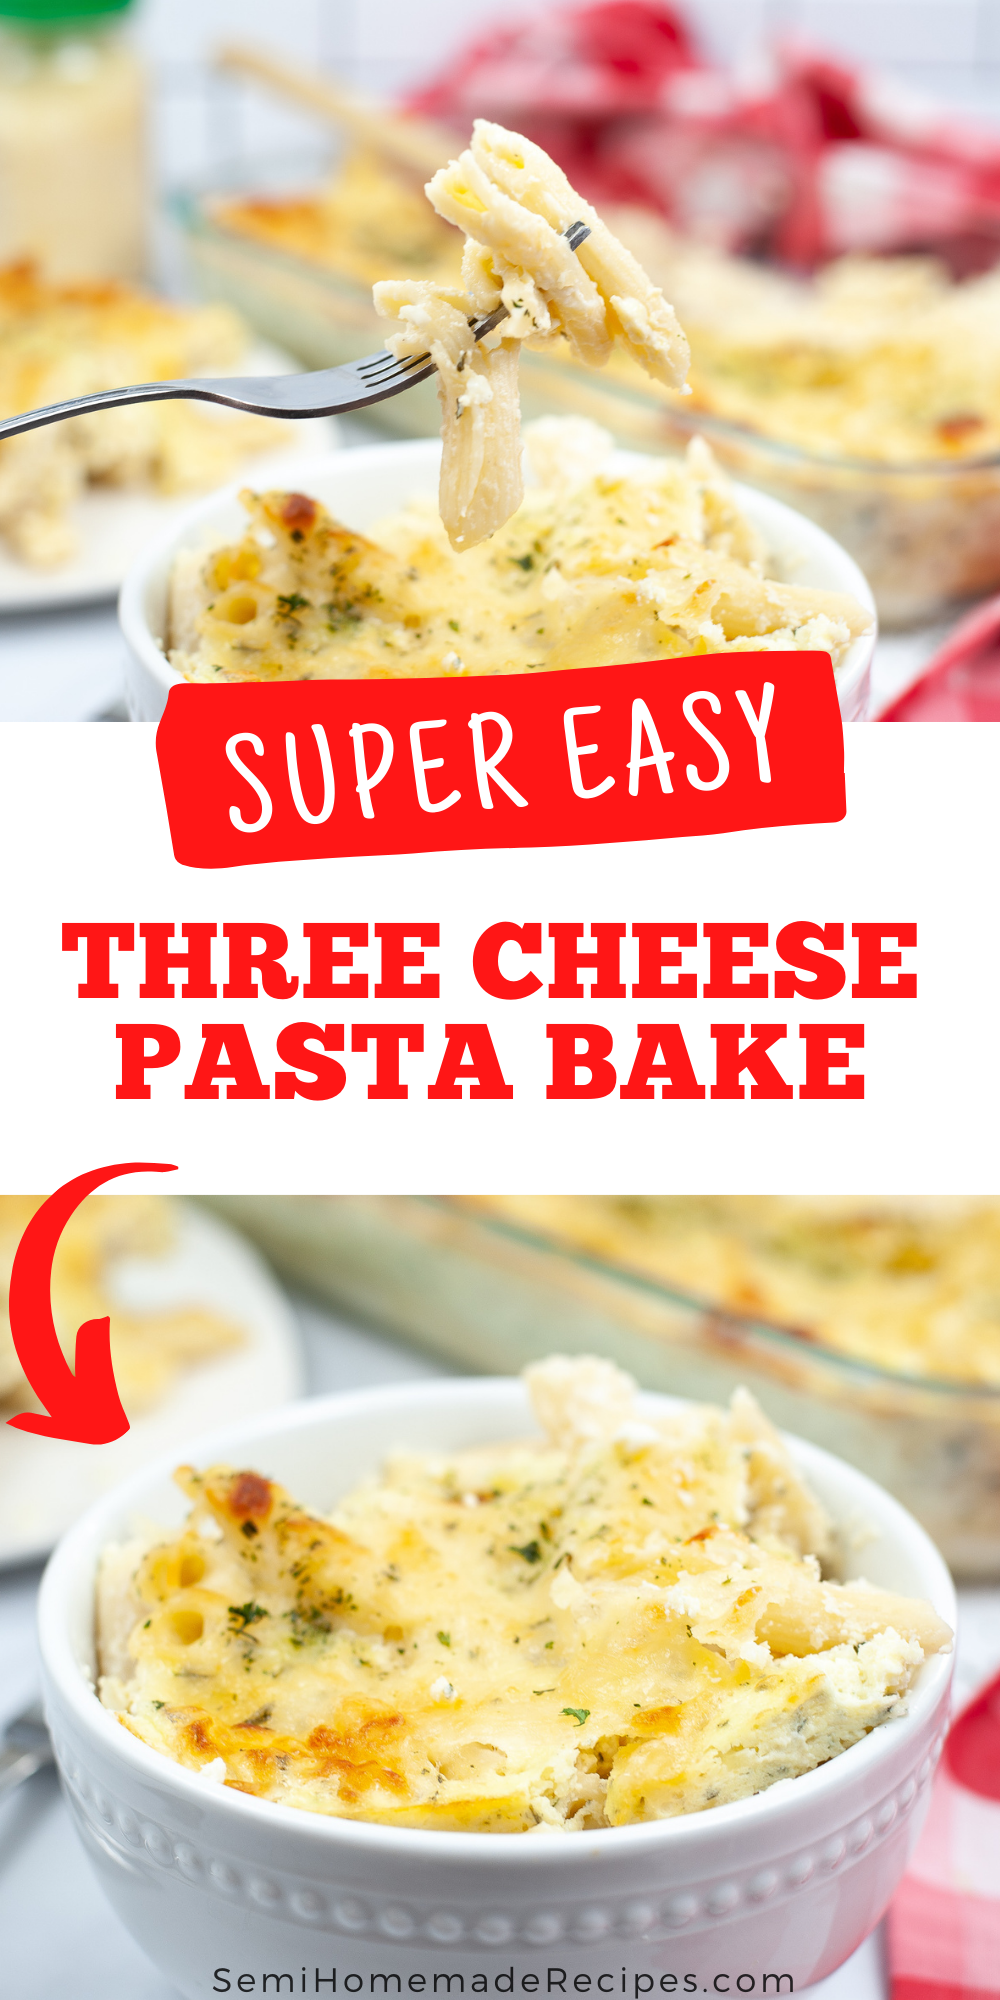 Three Cheese Pasta Bake is make with Mozzarella cheese Parmesan cheese and cottage cheese! Mixed together with penne pasta and baked for about 30 minutes makes for a great dinner!! 